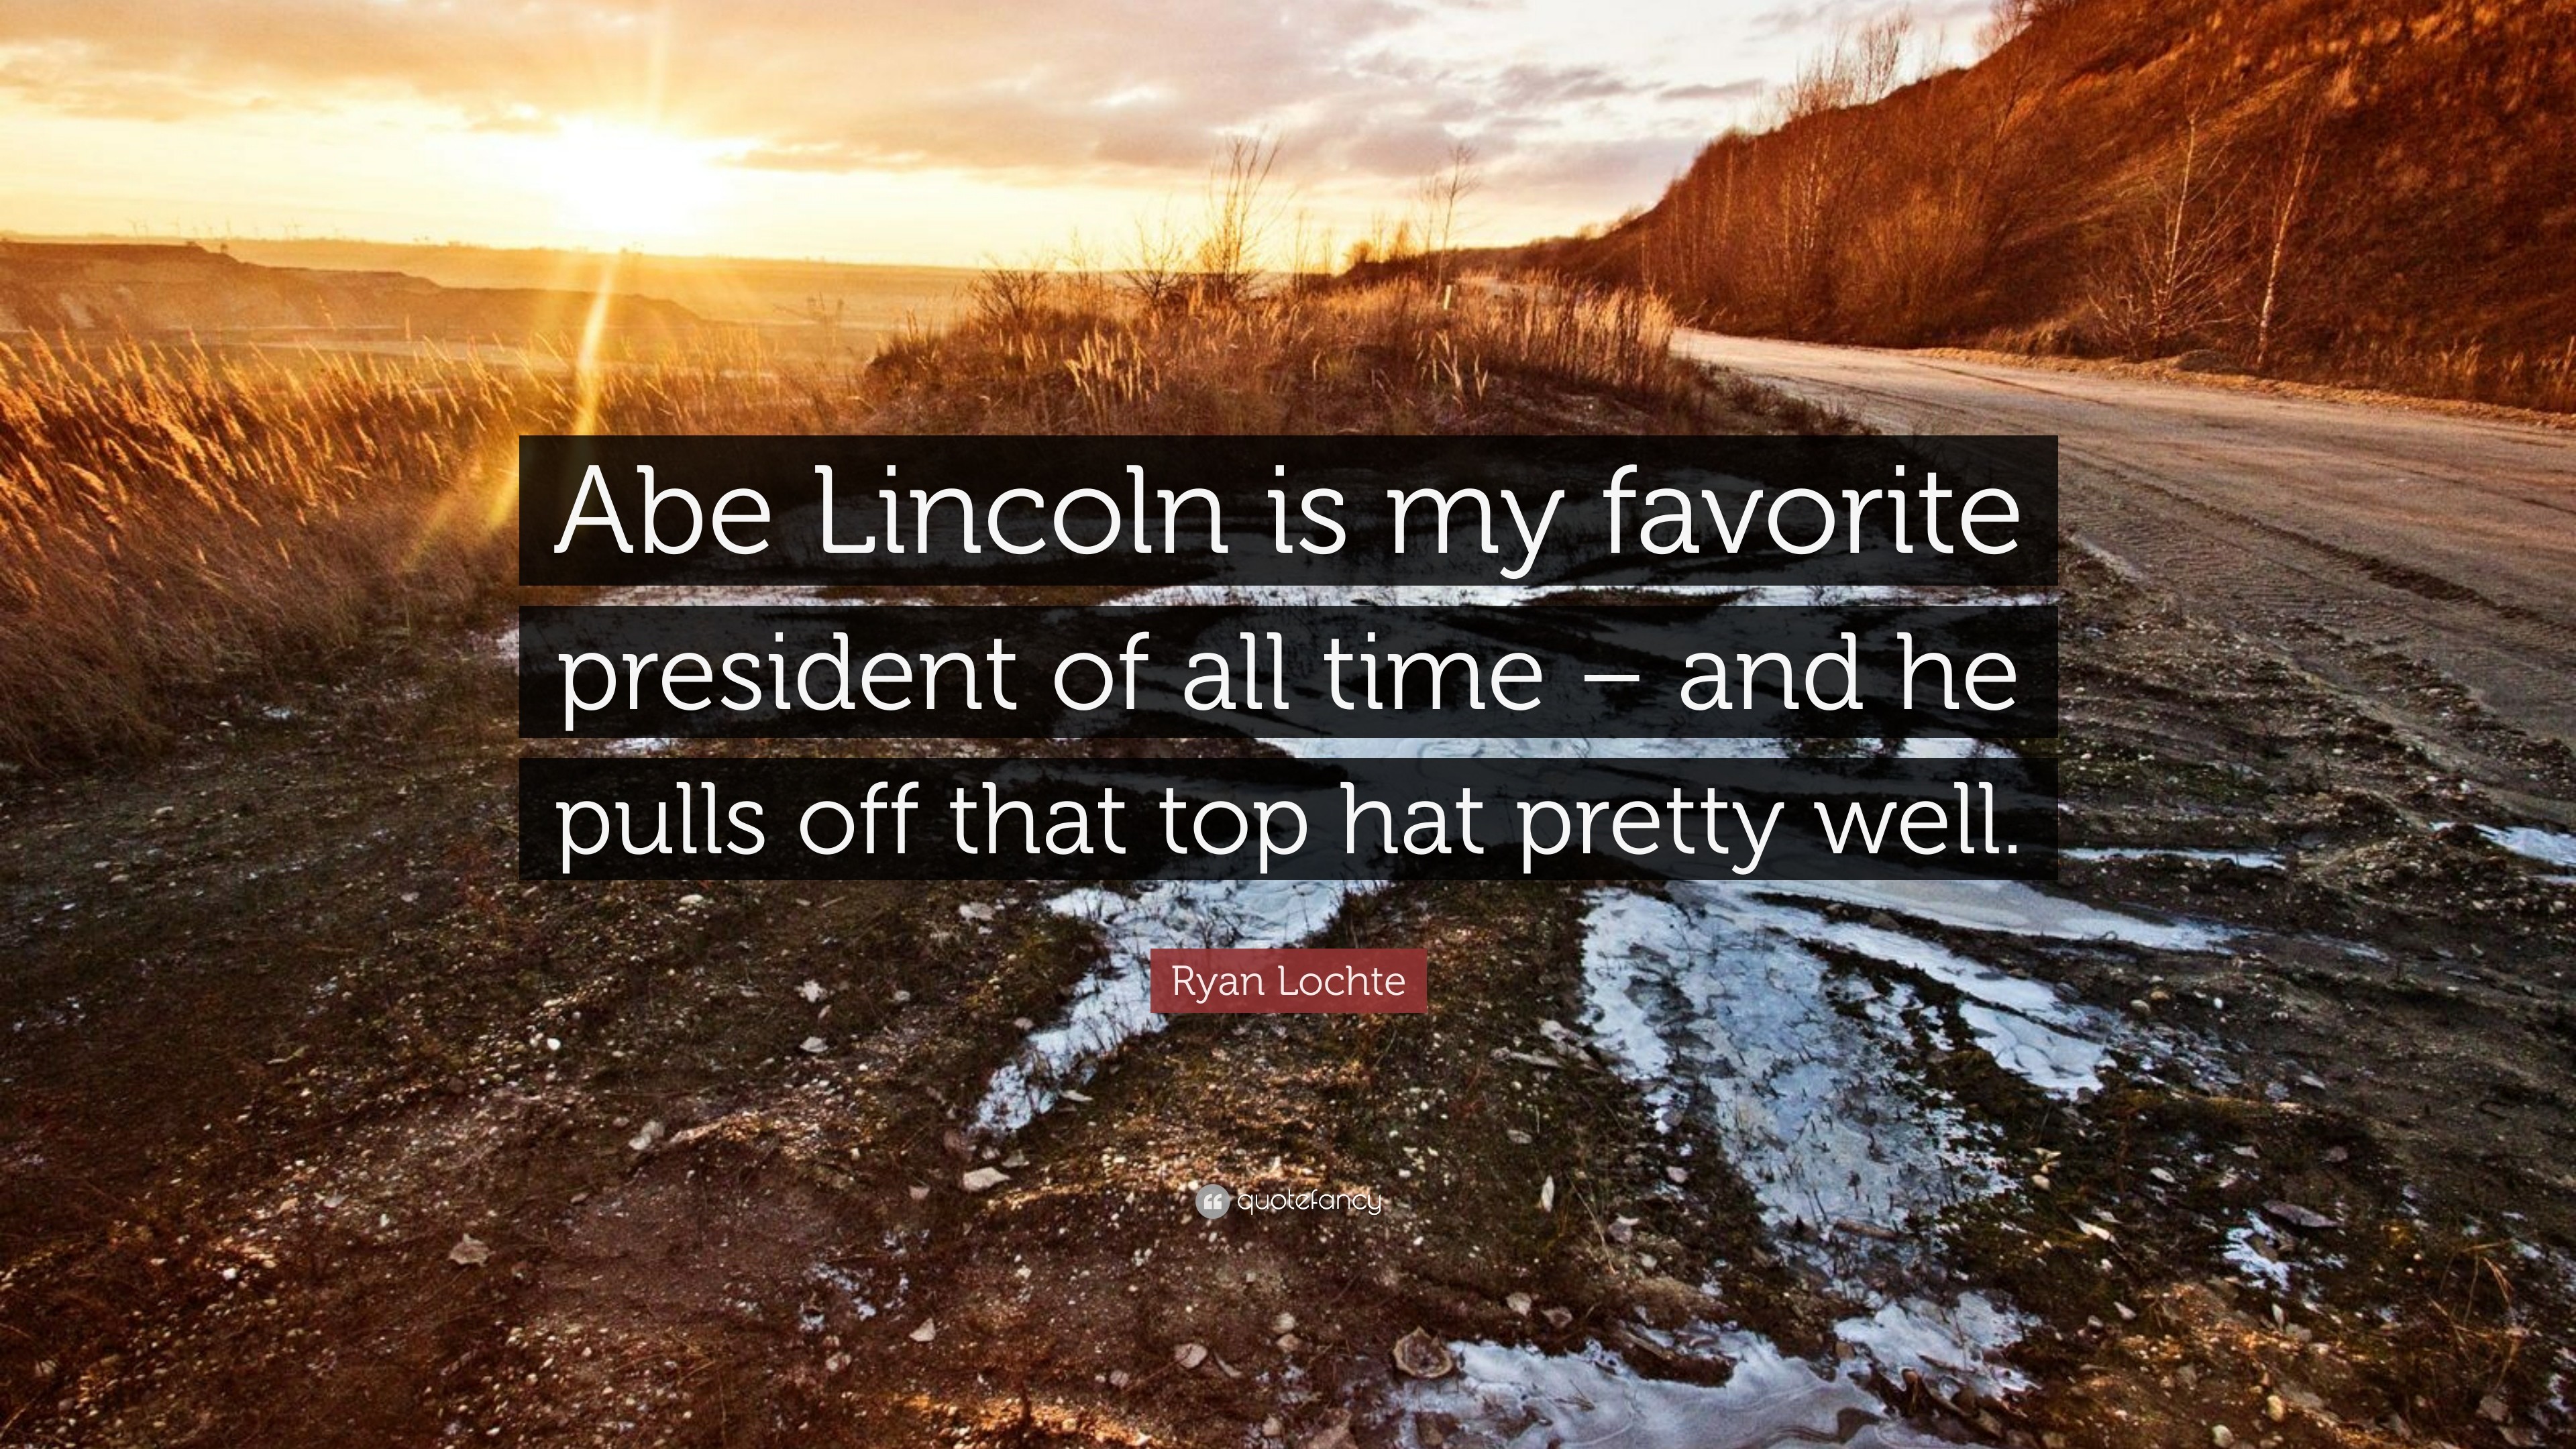 3840x2160 Ryan Lochte Quote: “Abe Lincoln is my favorite president of all time – and